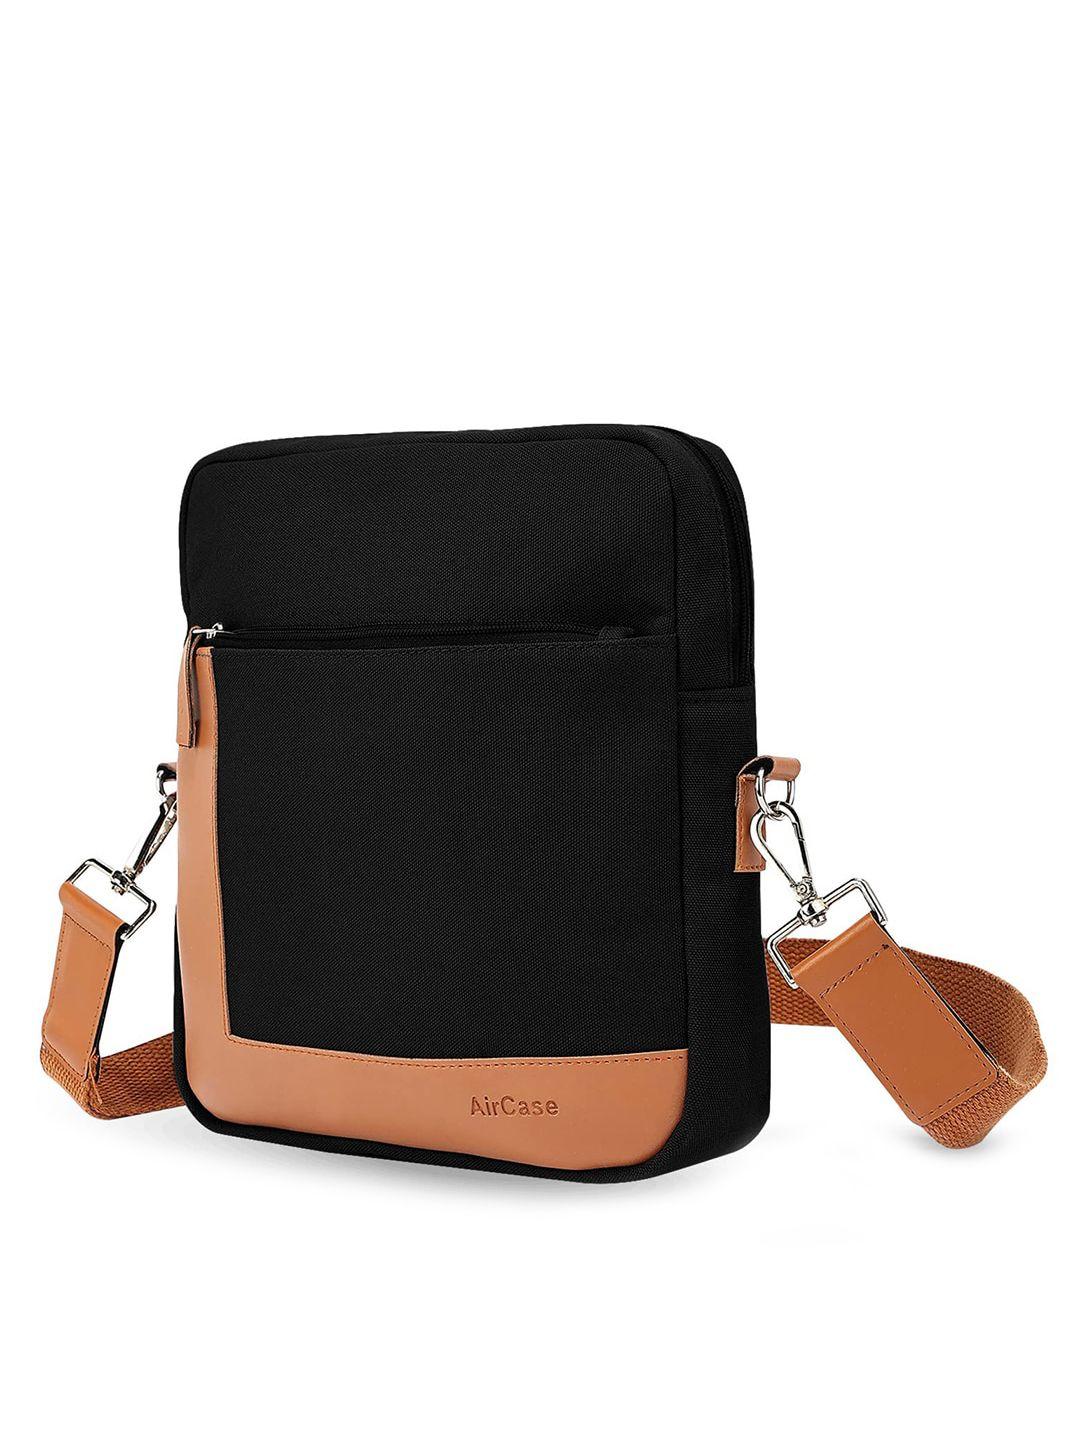 aircase-structured-sling-bag